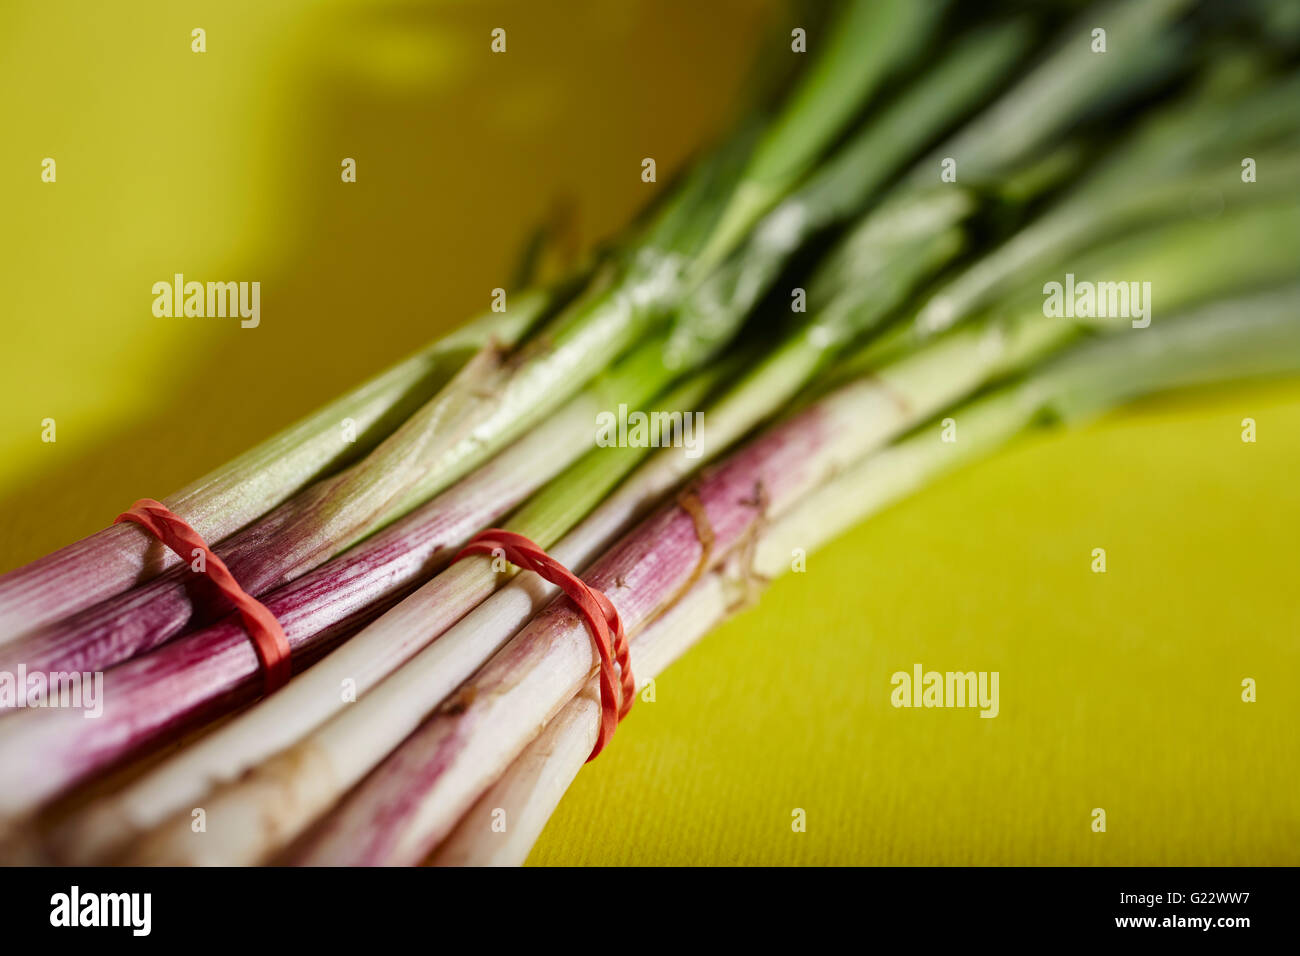 bunches of garlic greens Stock Photo